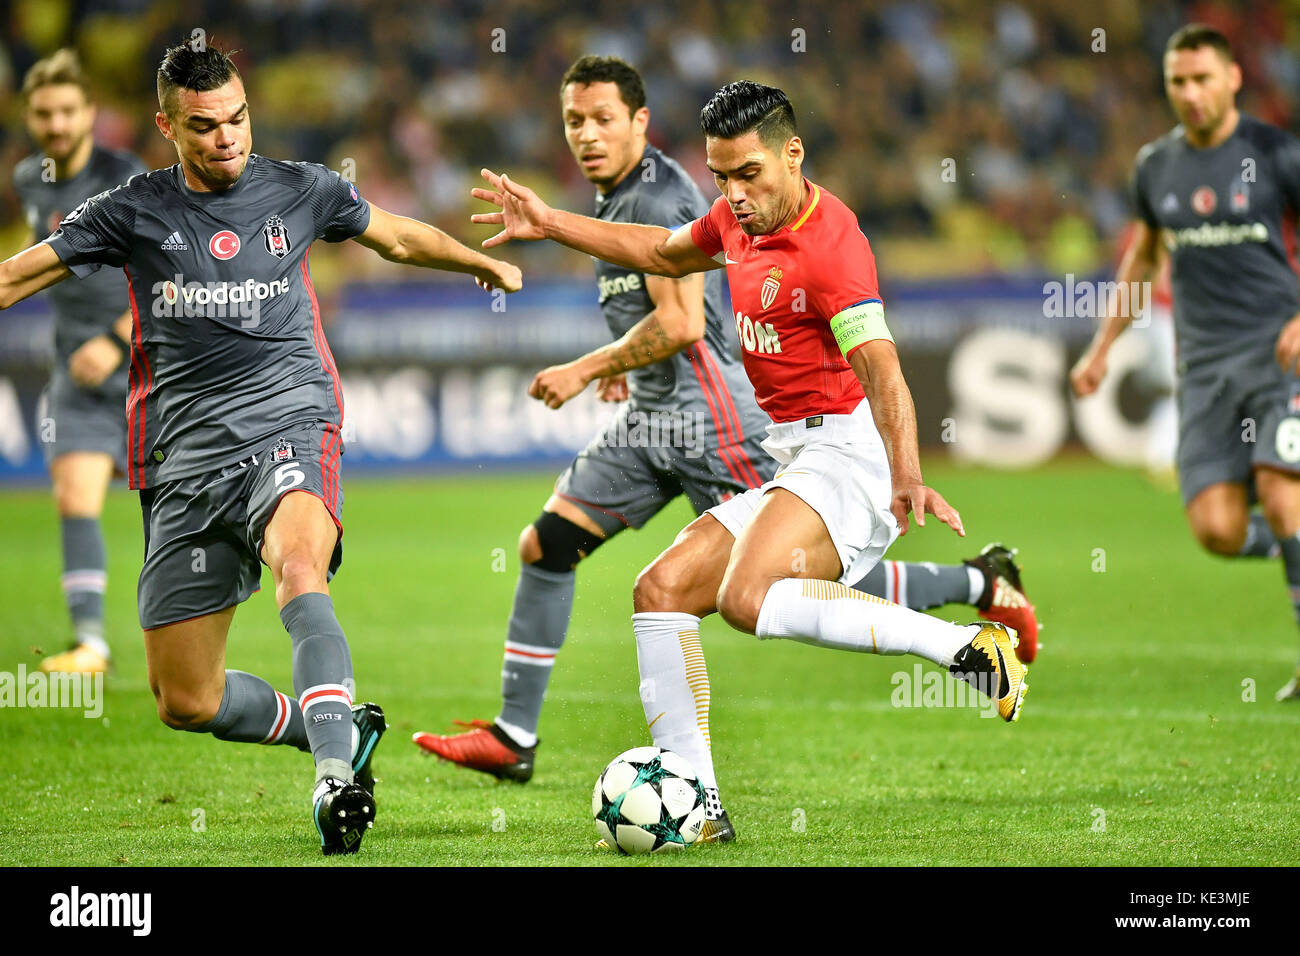 (171018) -- FONTVIEILLE, Oct. 18, 2017 (Xinhua) -- Radamel Falcao (R) of Monaco tries to shoot during the match against Besiktas of Group G of 2017-18 Champions League at the Stade de Louis II in Fontvieille, Monaco on Oct. 17, 2017. Monaco was defeated with 1-2. (Xinhua/Chen Yichen) Stock Photo